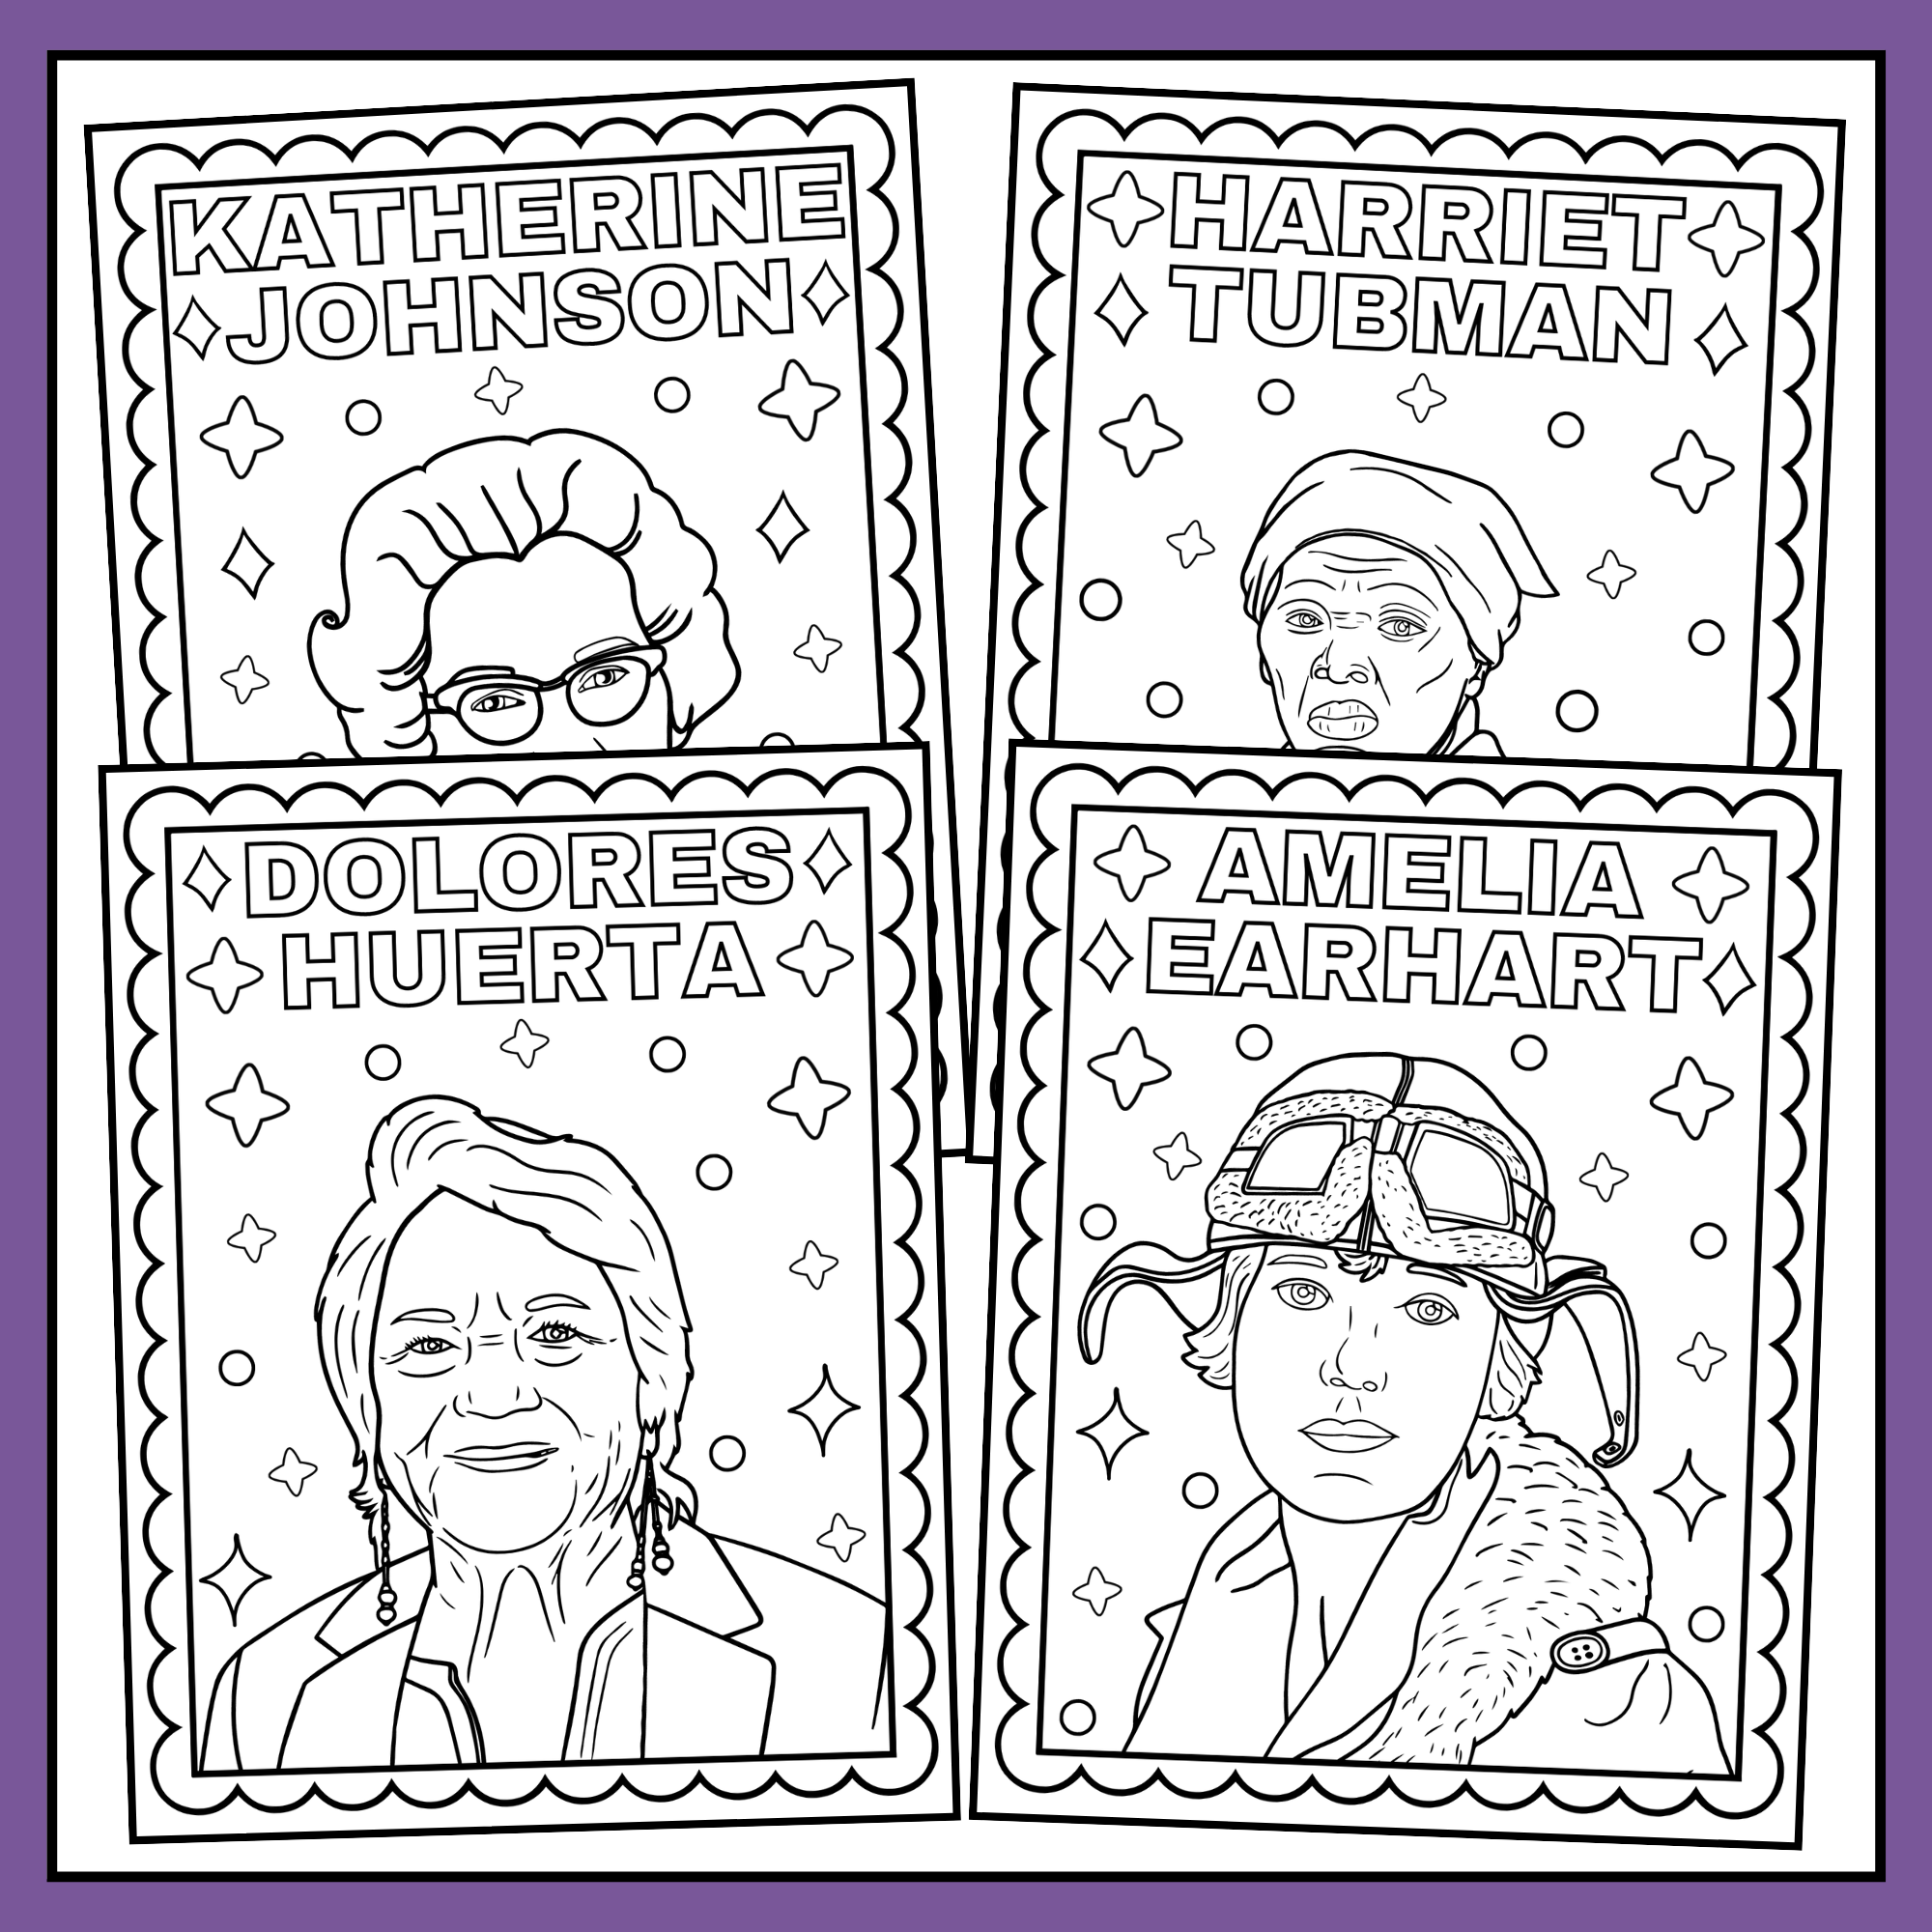 Famous women coloring pages womens history month coloring pages made by teachers